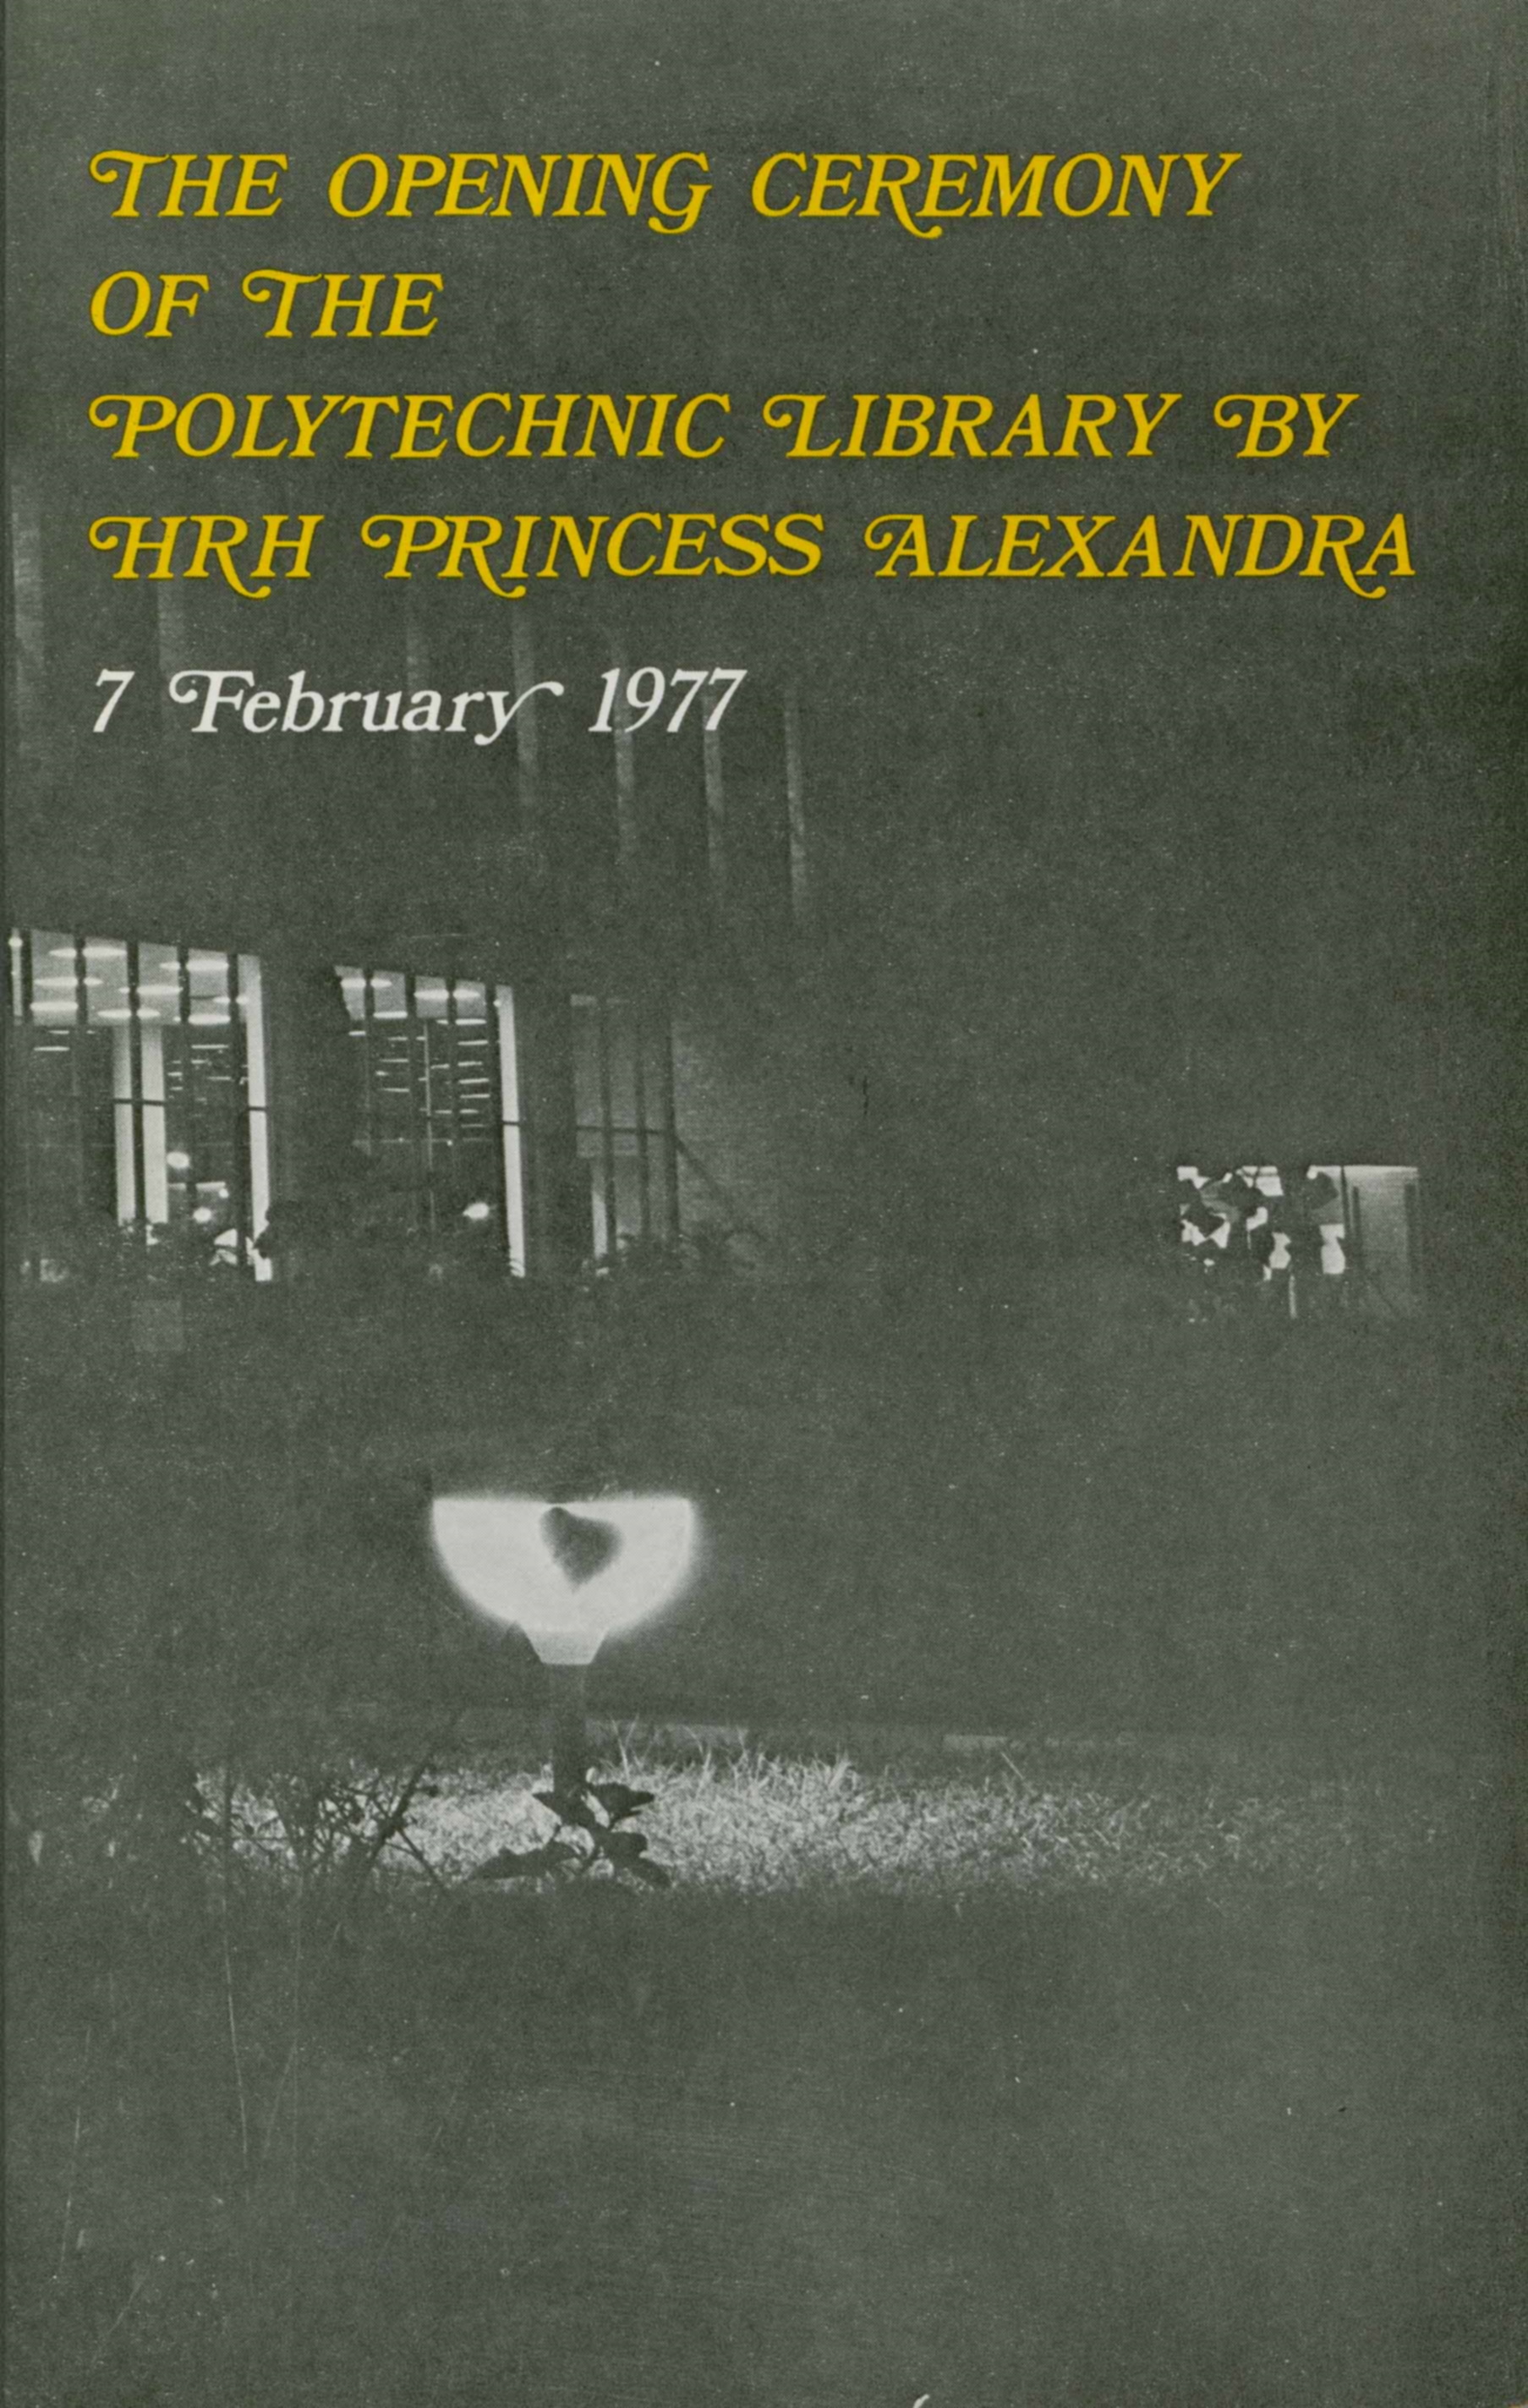 The opening ceremony of The Polytechnic Library by HRH Princess Alexandra. 7 February 1977